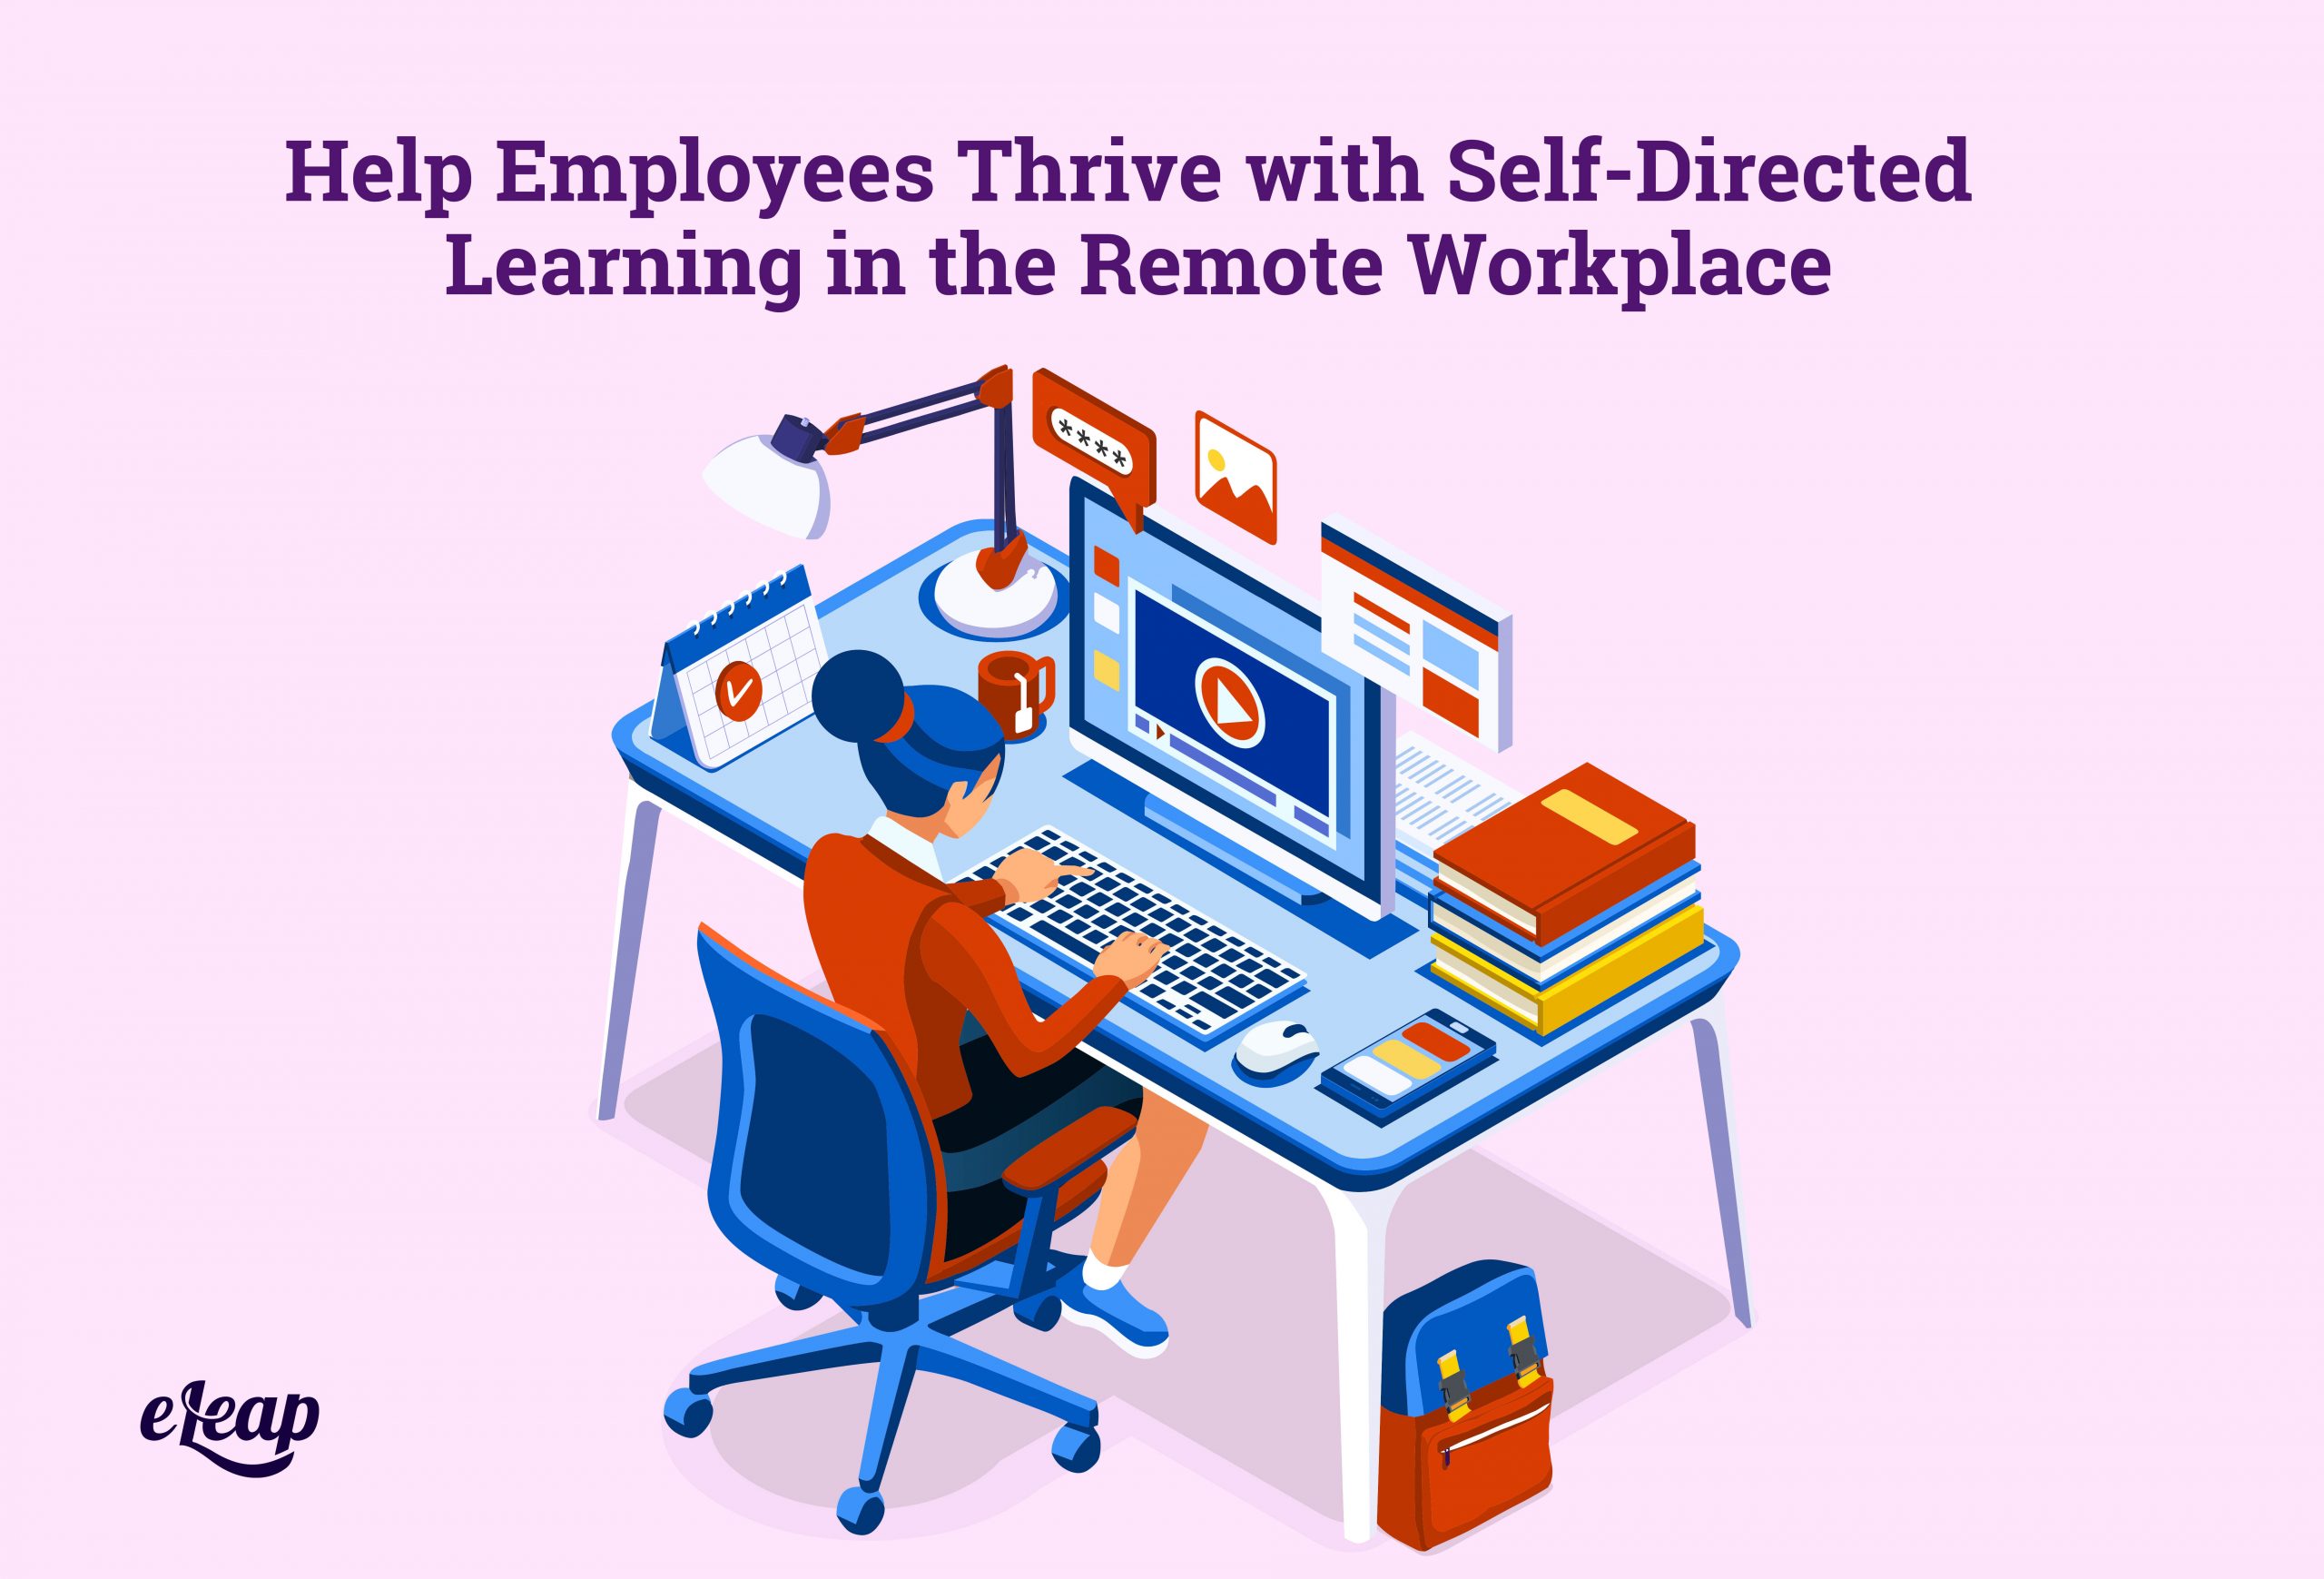 Help Employees Thrive with Self-Directed Learning in the Remote Workplace